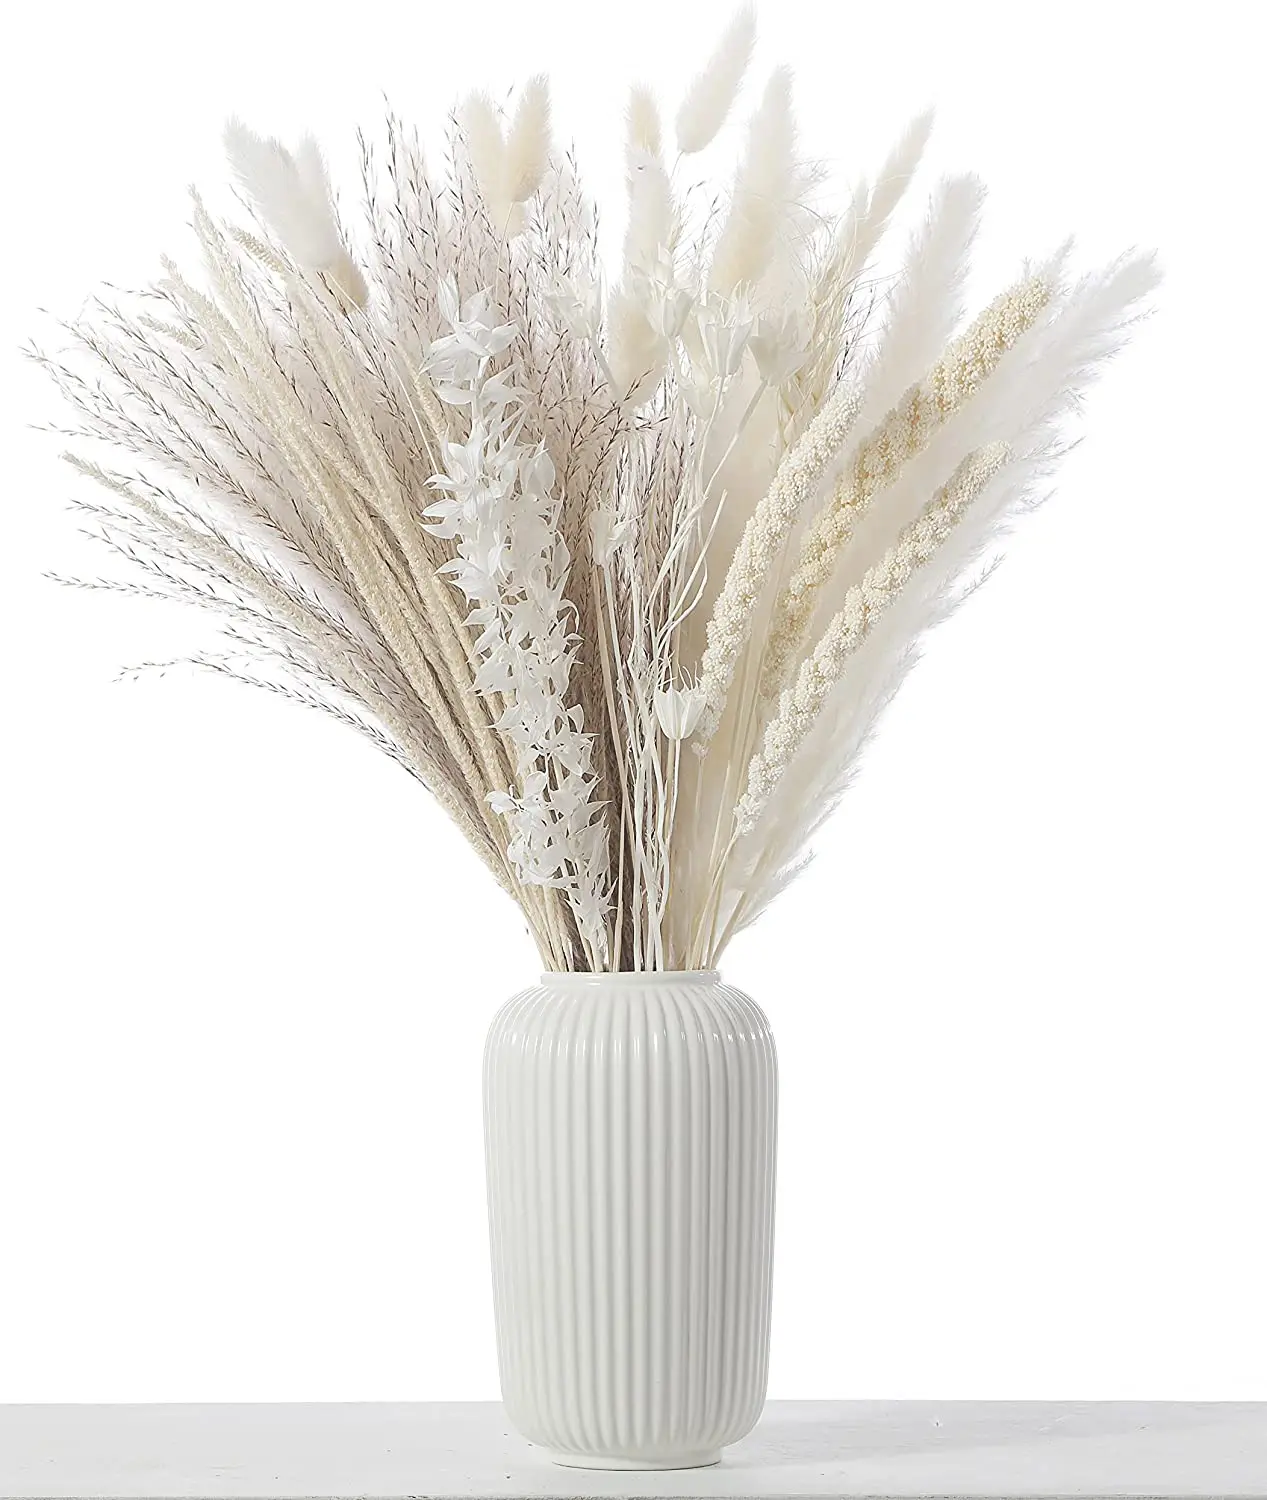 

85 Stems Dried Flowers Pompous Grass, Bunny Tails Natural Reed Grass Boho Home Decor Ideal for Wedding Decoration Dekoration